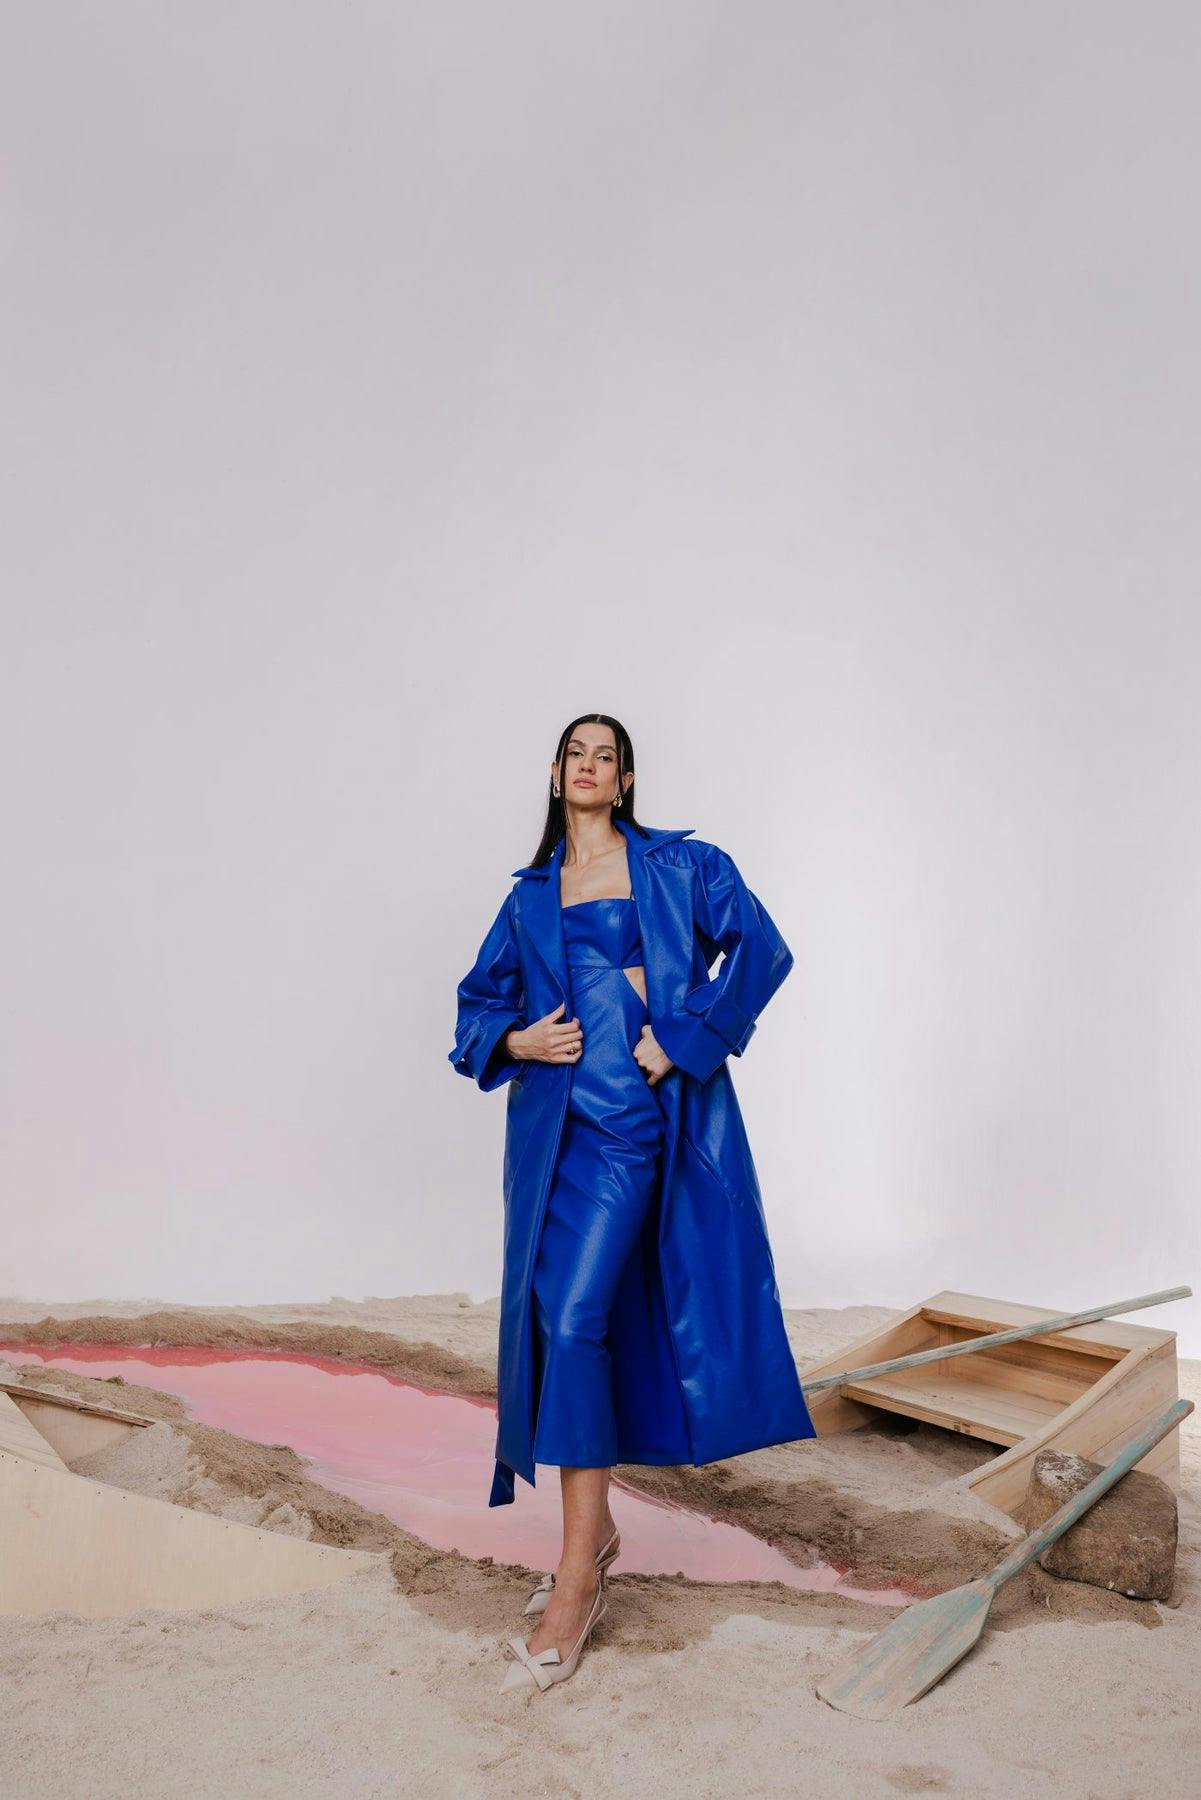 INOLA BLUE OVERSIZED TRENCH JACKET WITH MIDI SHEATH DRESS, a product by July Issue